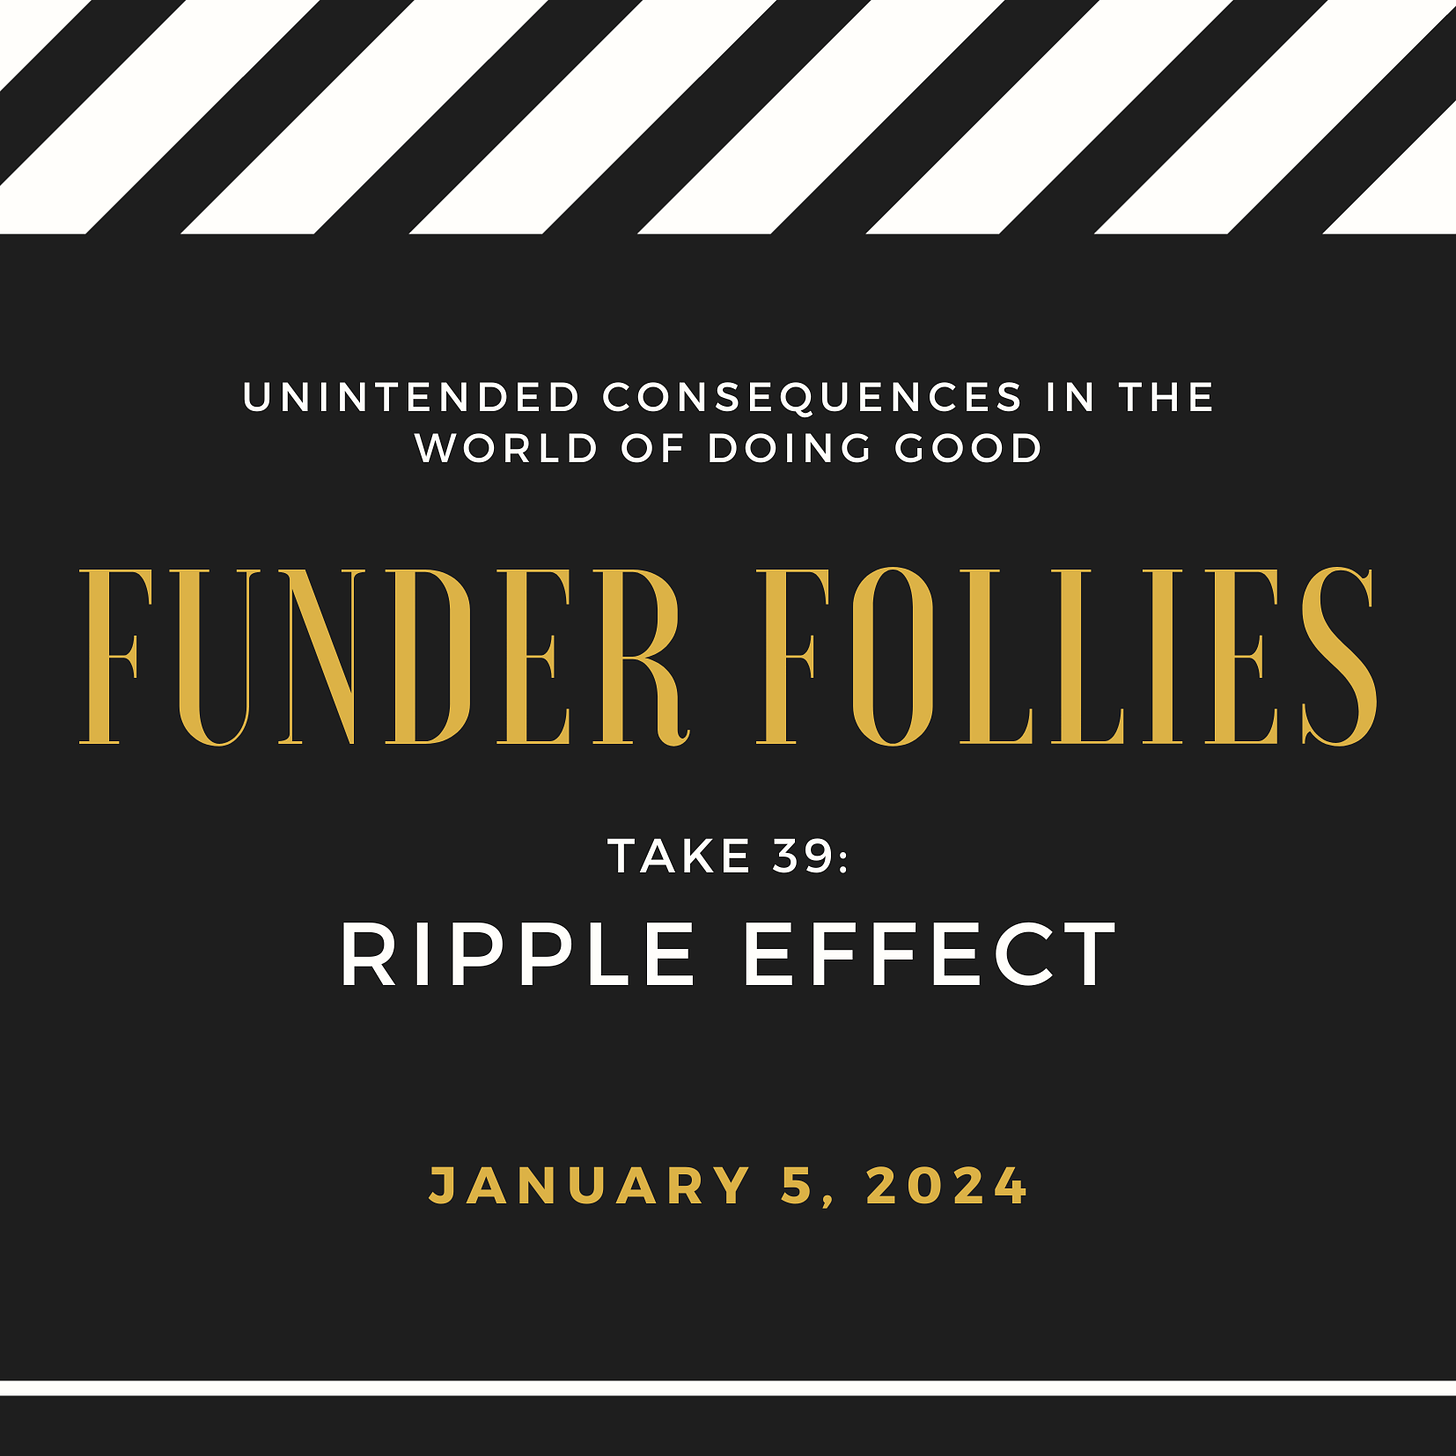 black and white film clapper board showing Funder Follies, Unintended Consequences of Doing Good, Take #39: Ripple Effect, January 5, 2024